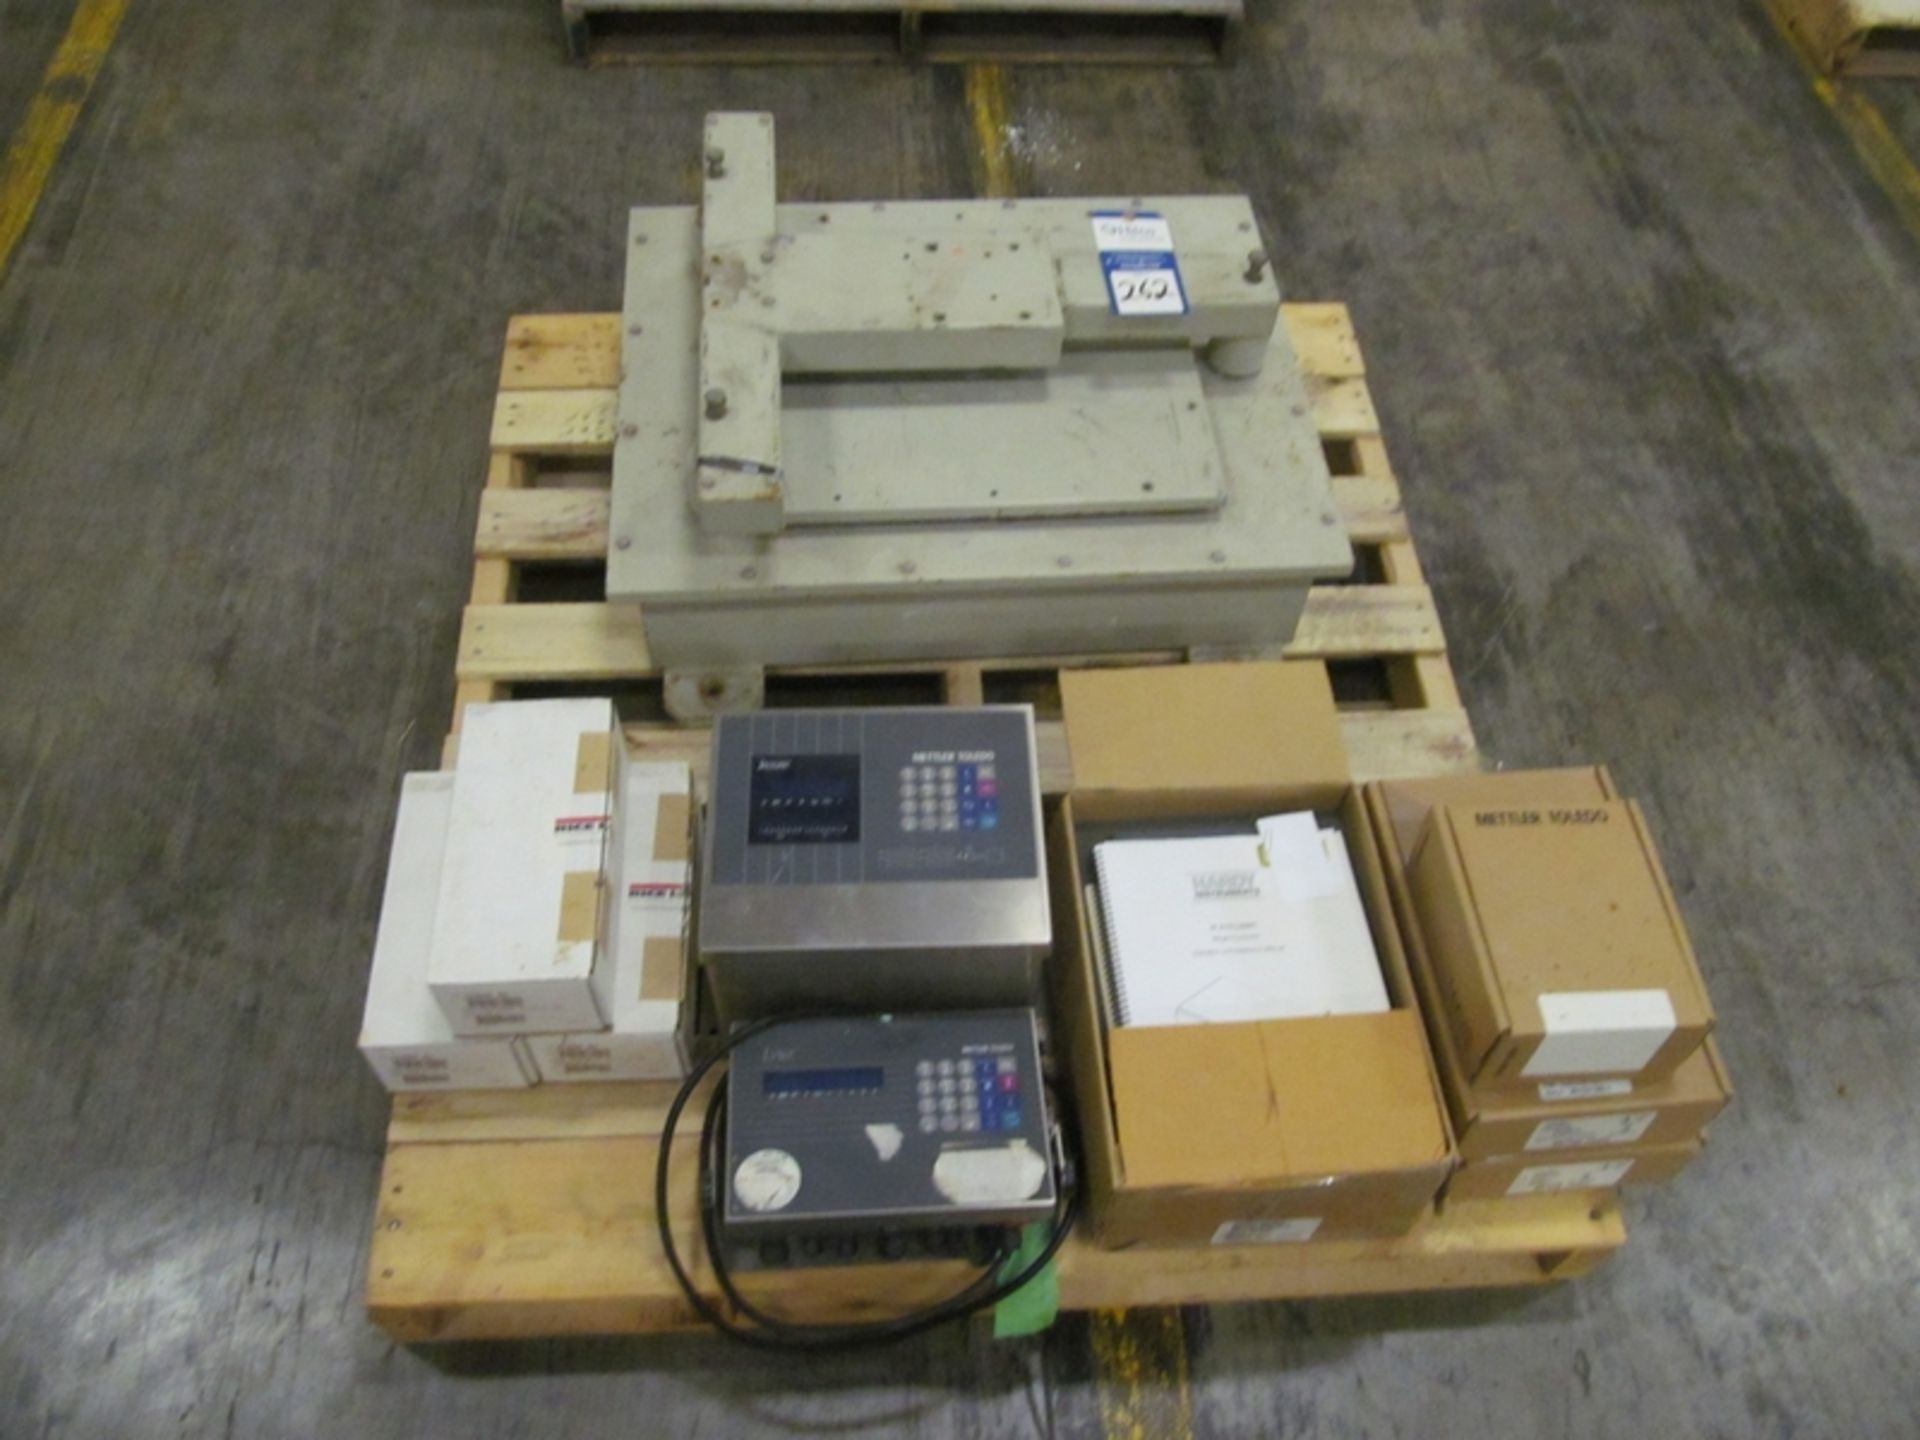 Skids Of Assorted K-Tron Load Cell Parts ; w/ (2) Mettler Toledo Scale Controls & (1) Hardy Scae - Image 2 of 2